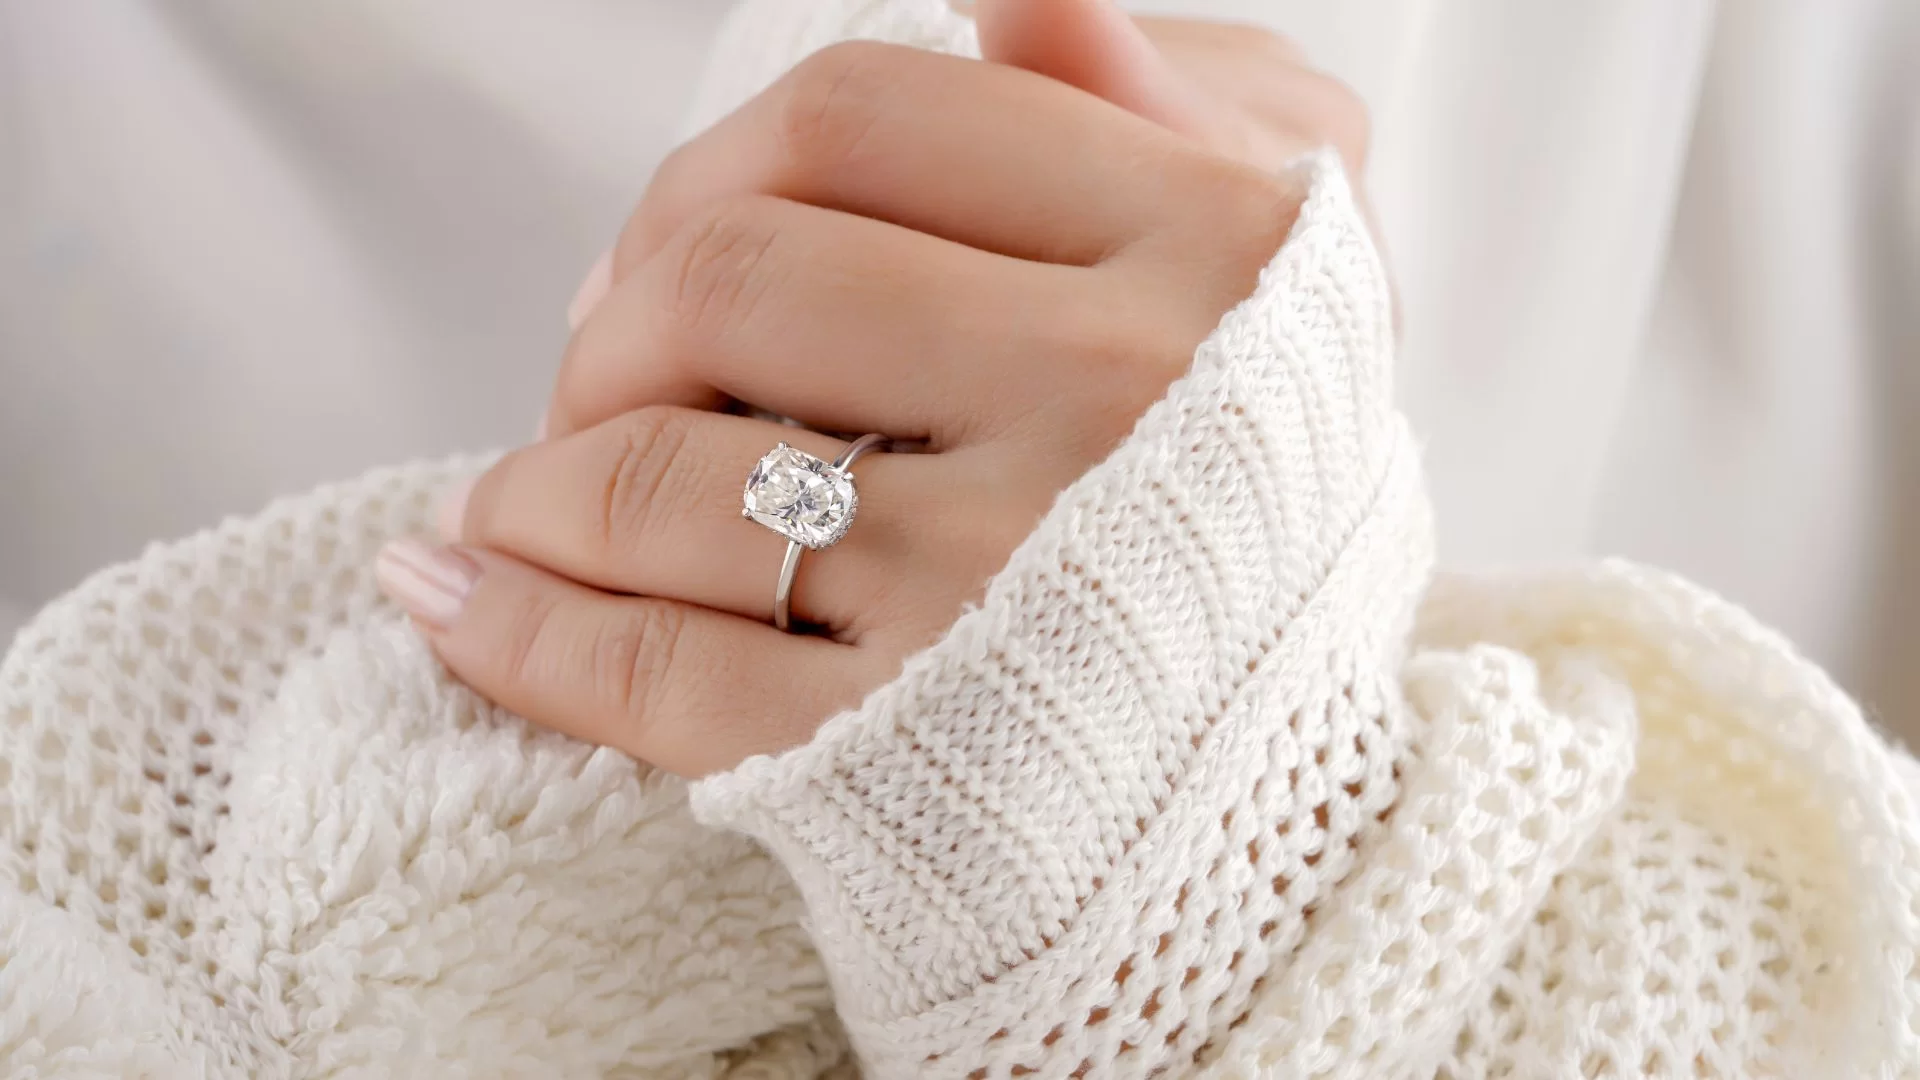 How to Select an Engagement Ring